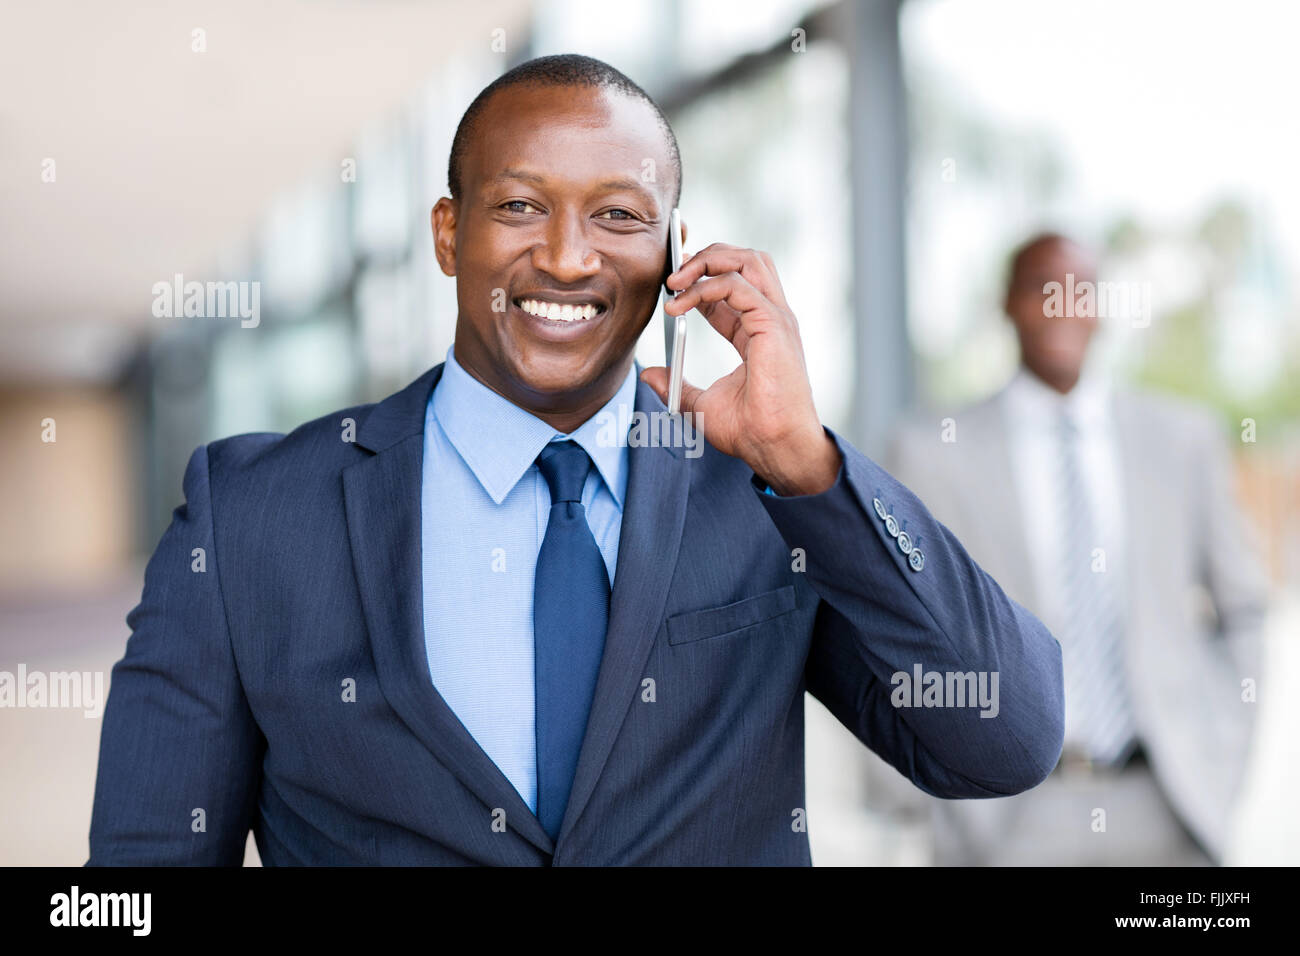 Cheerful Woman talking on cell phone in office Banque D'Images